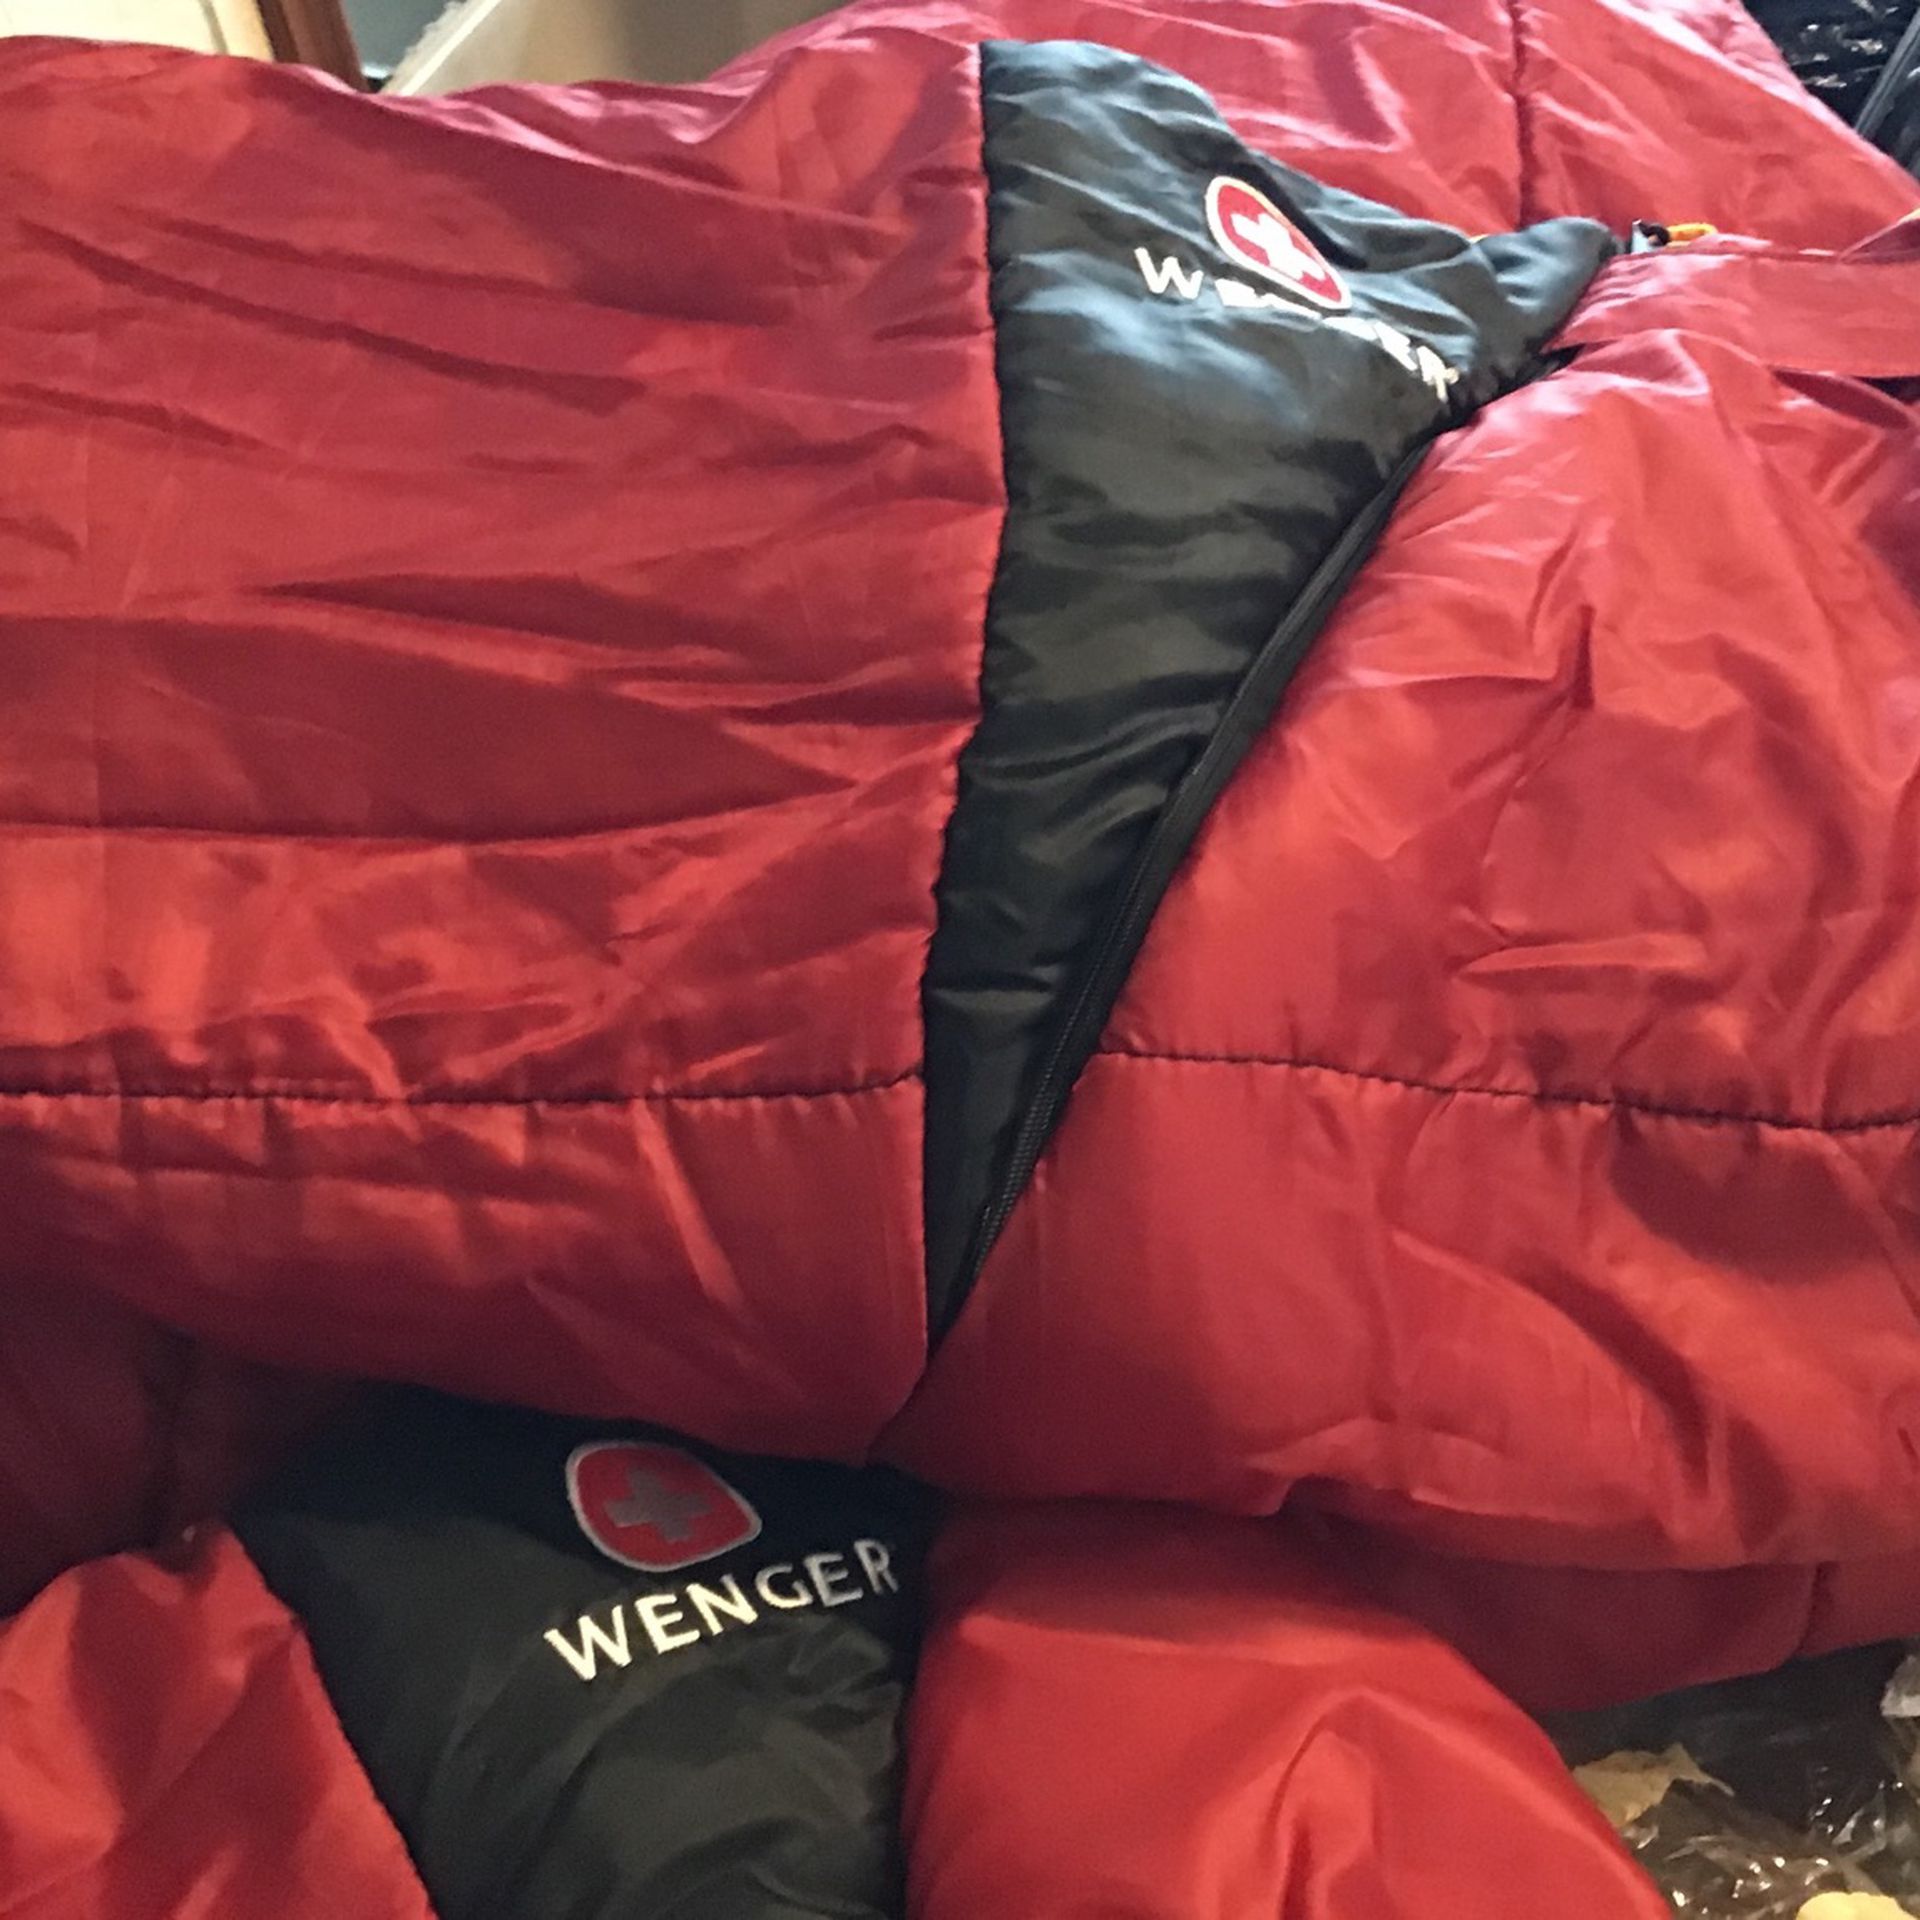 Wenger Sleeping Bags Very Good Condition